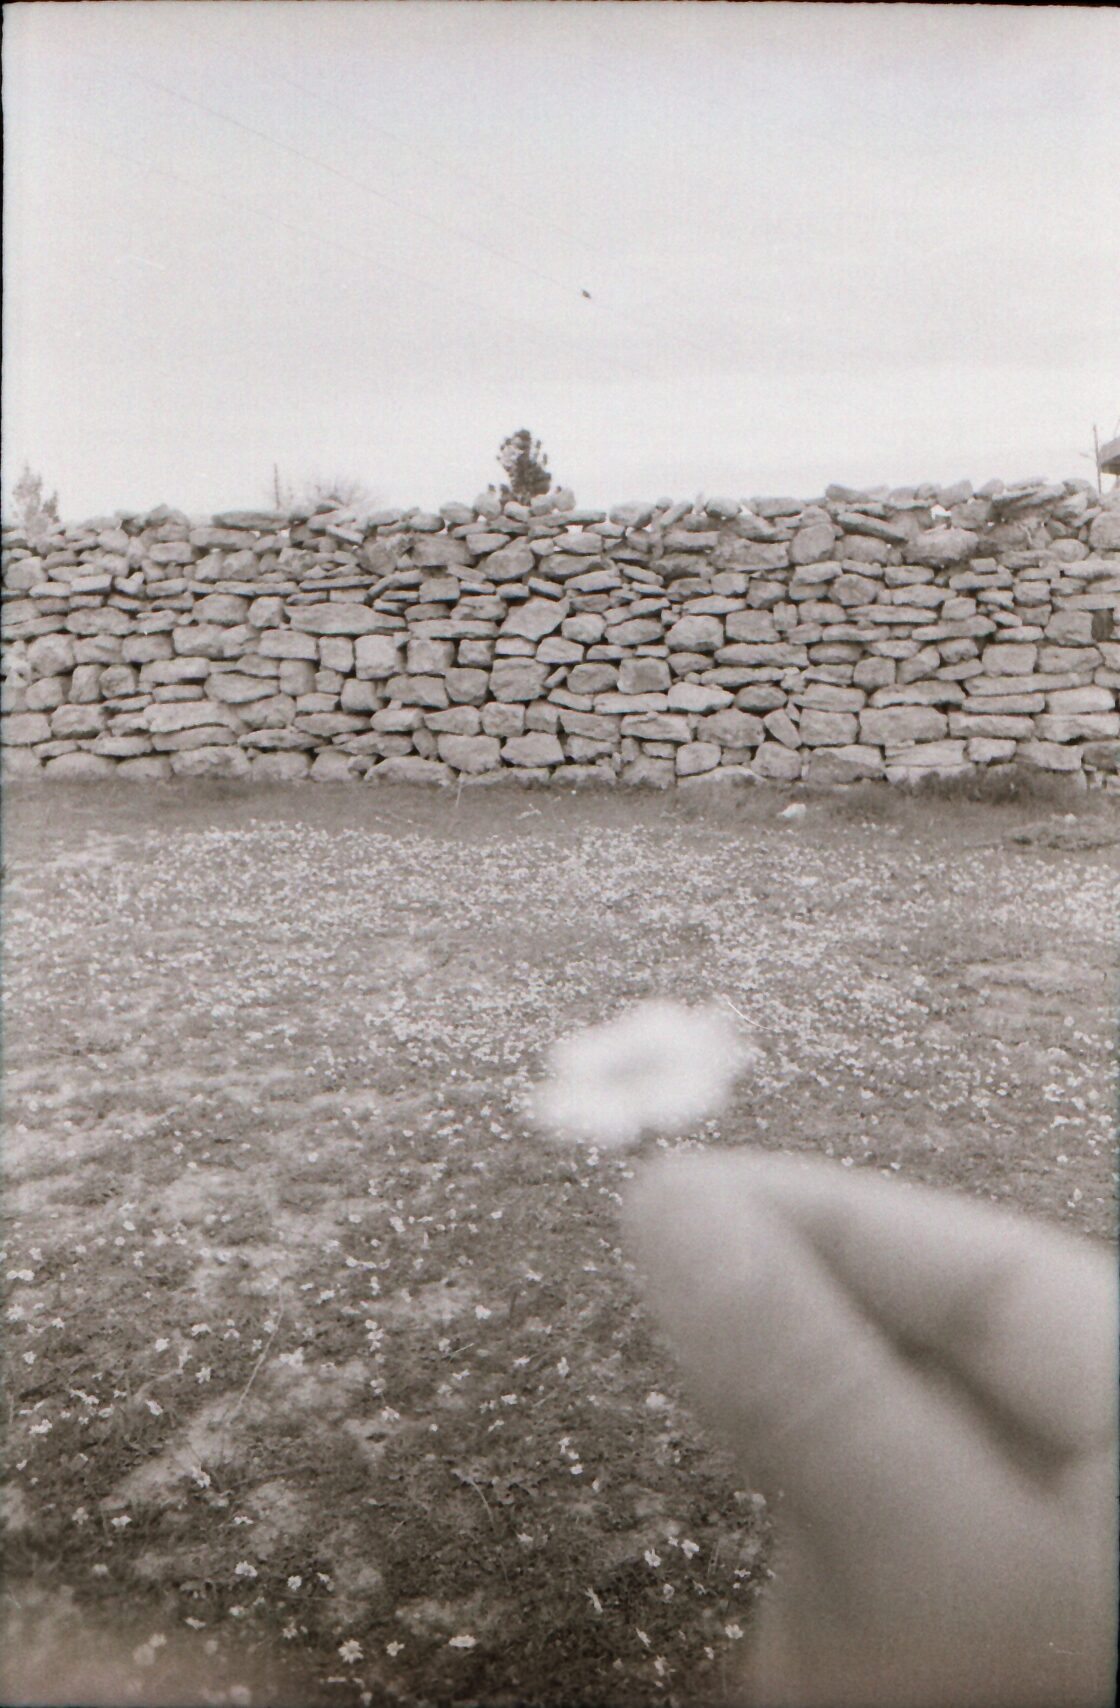 hand holding a flower in a field with a brick wall in the distance